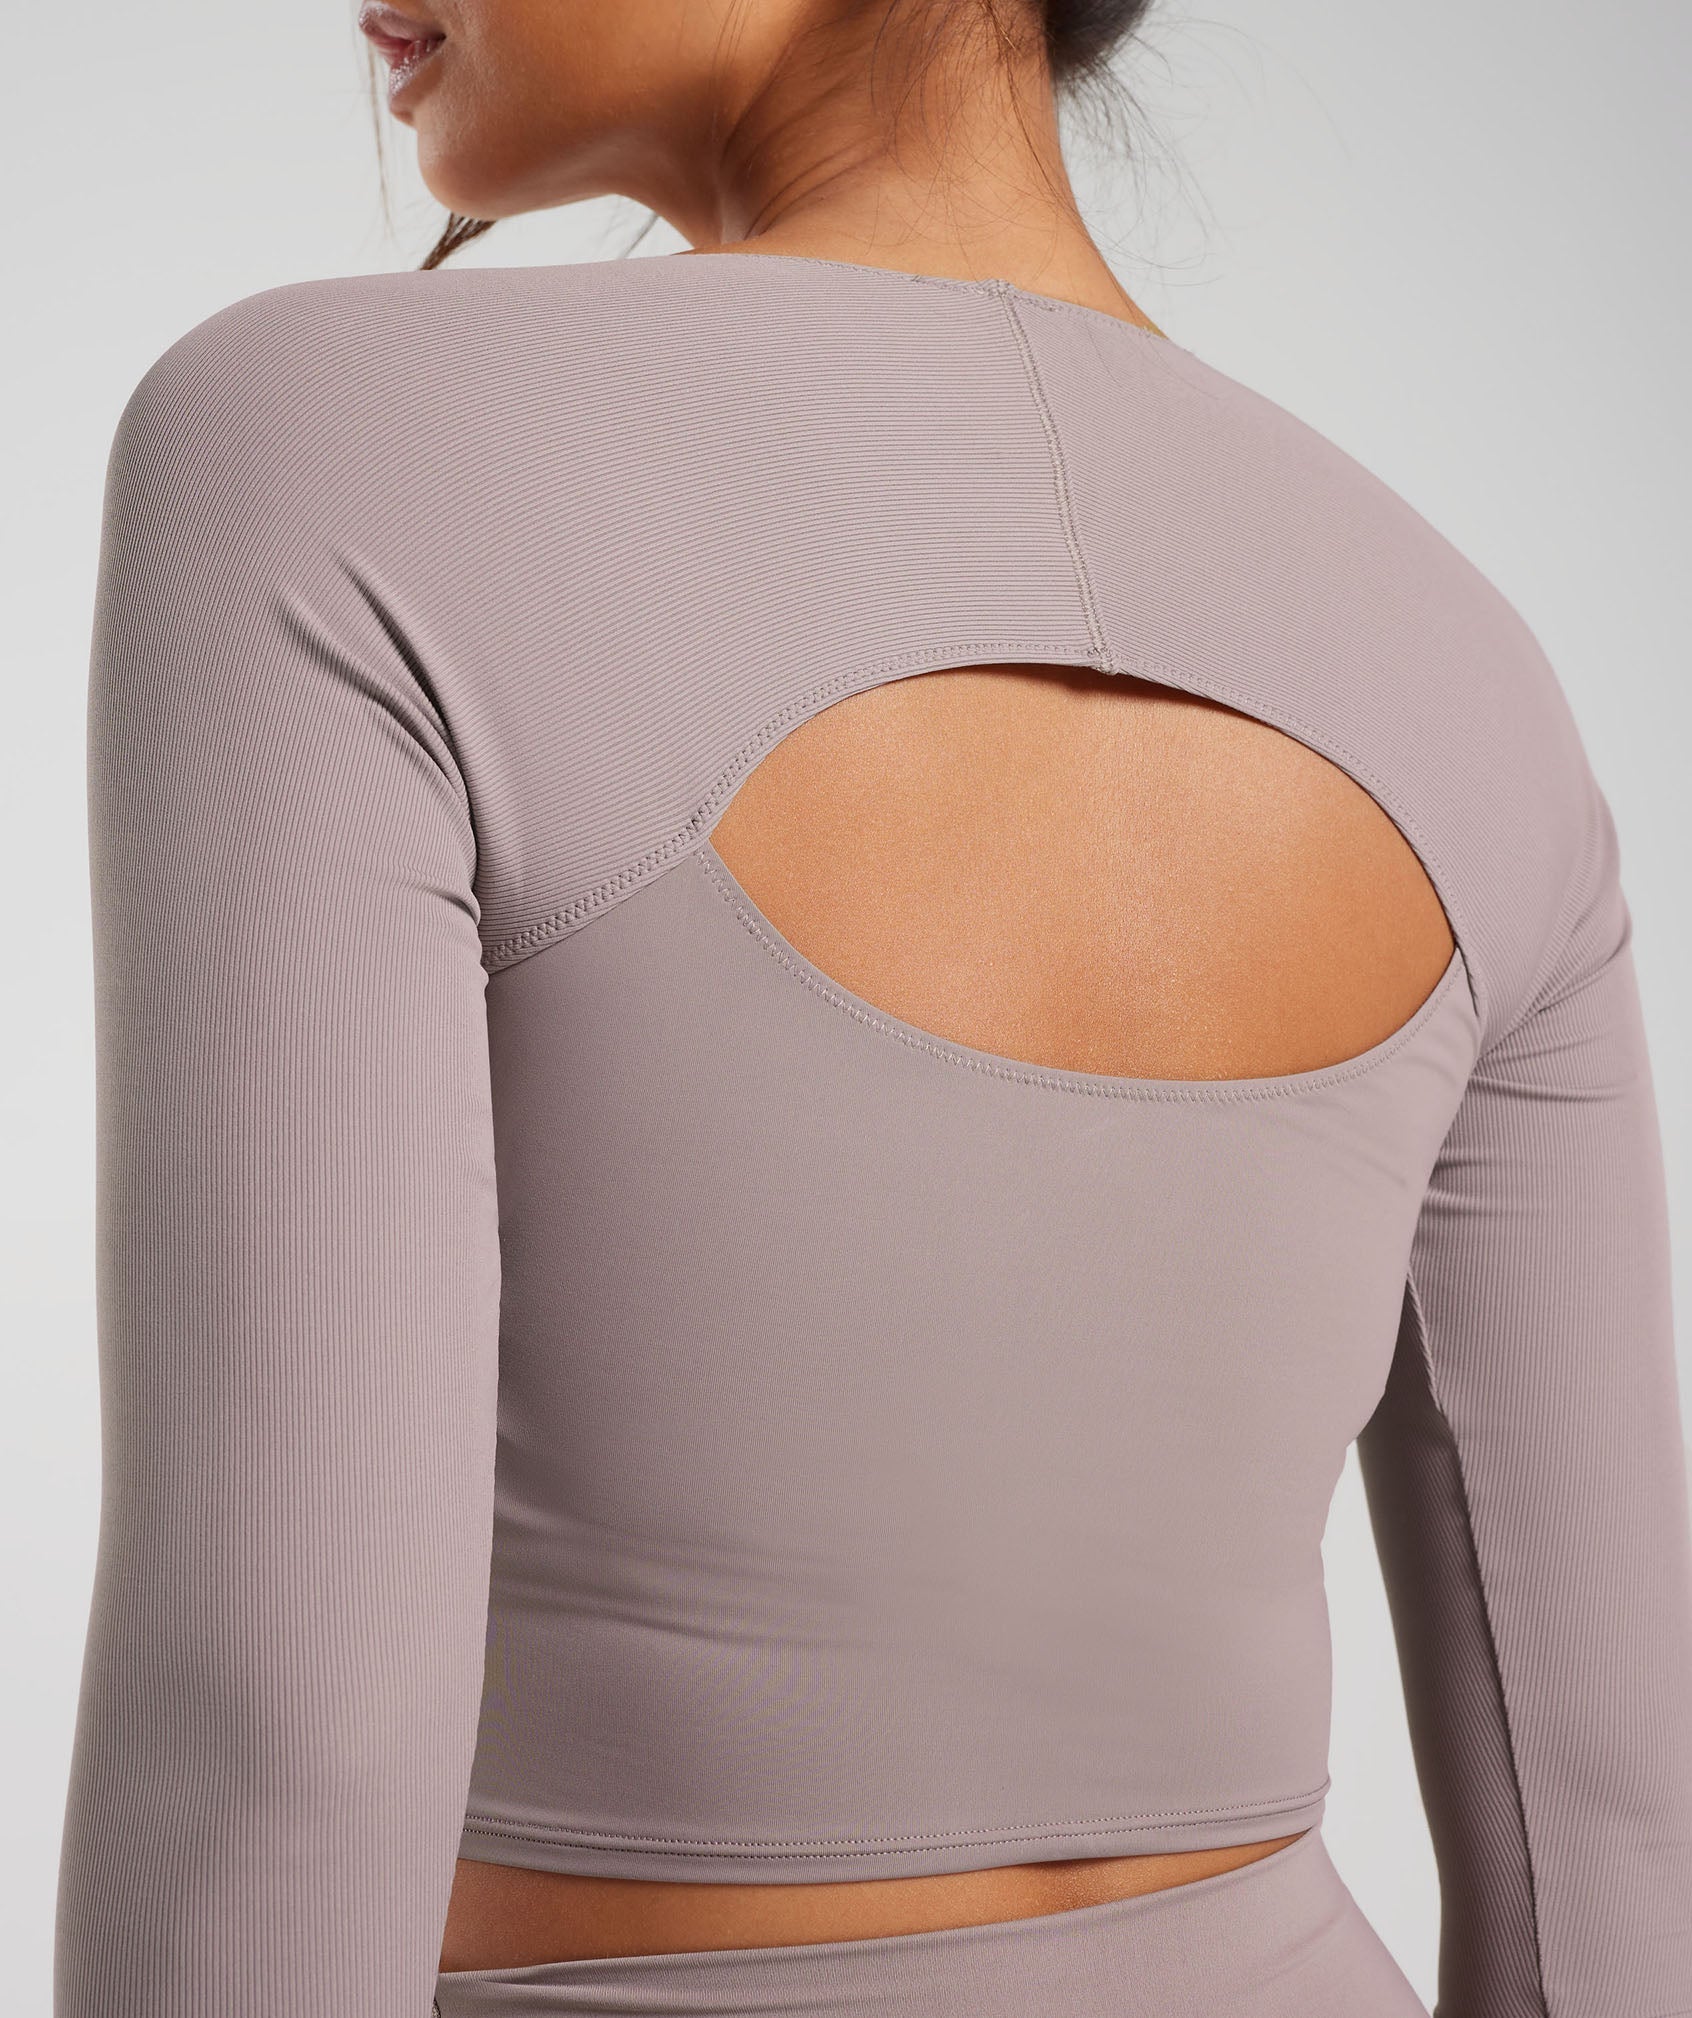 Elevate 3/4 Sleeve Crop Top in Washed Mauve - view 5